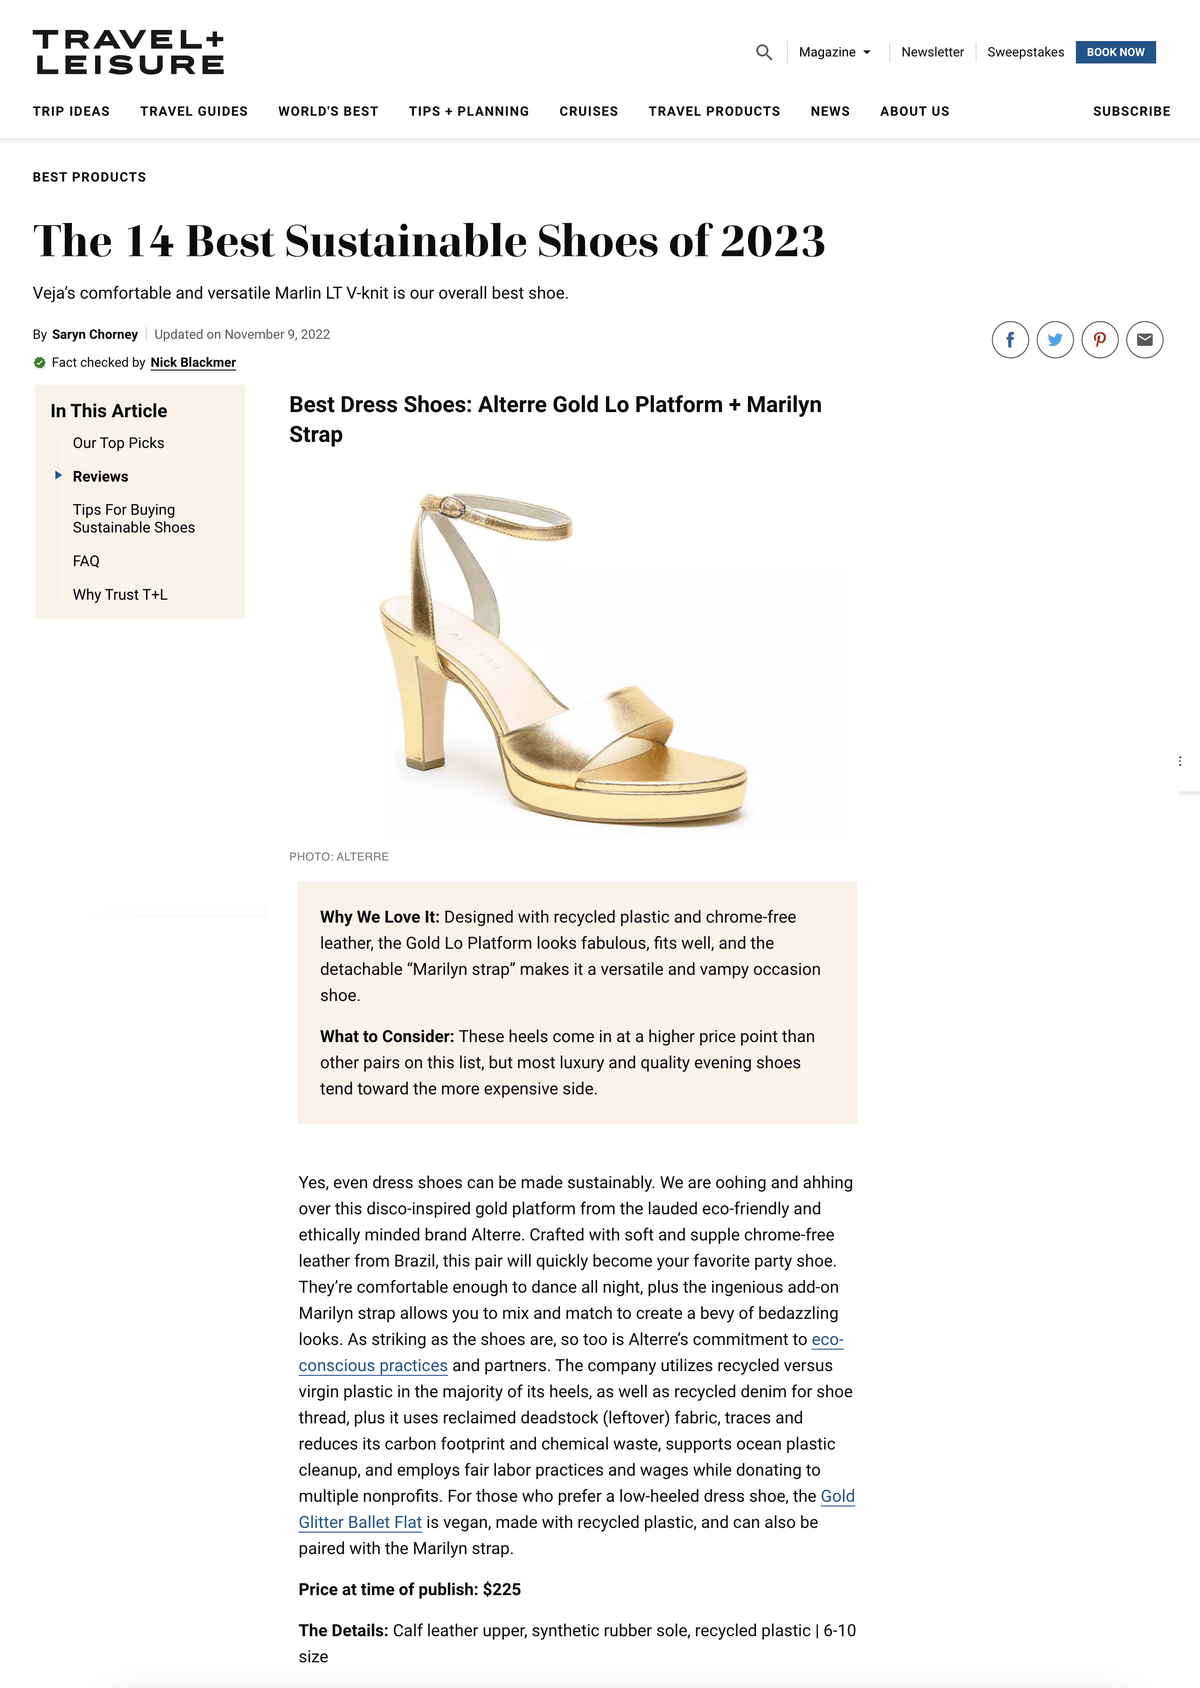 Alterre shoes featured on Travel + Leisure - Customizable Gold Platform Heels